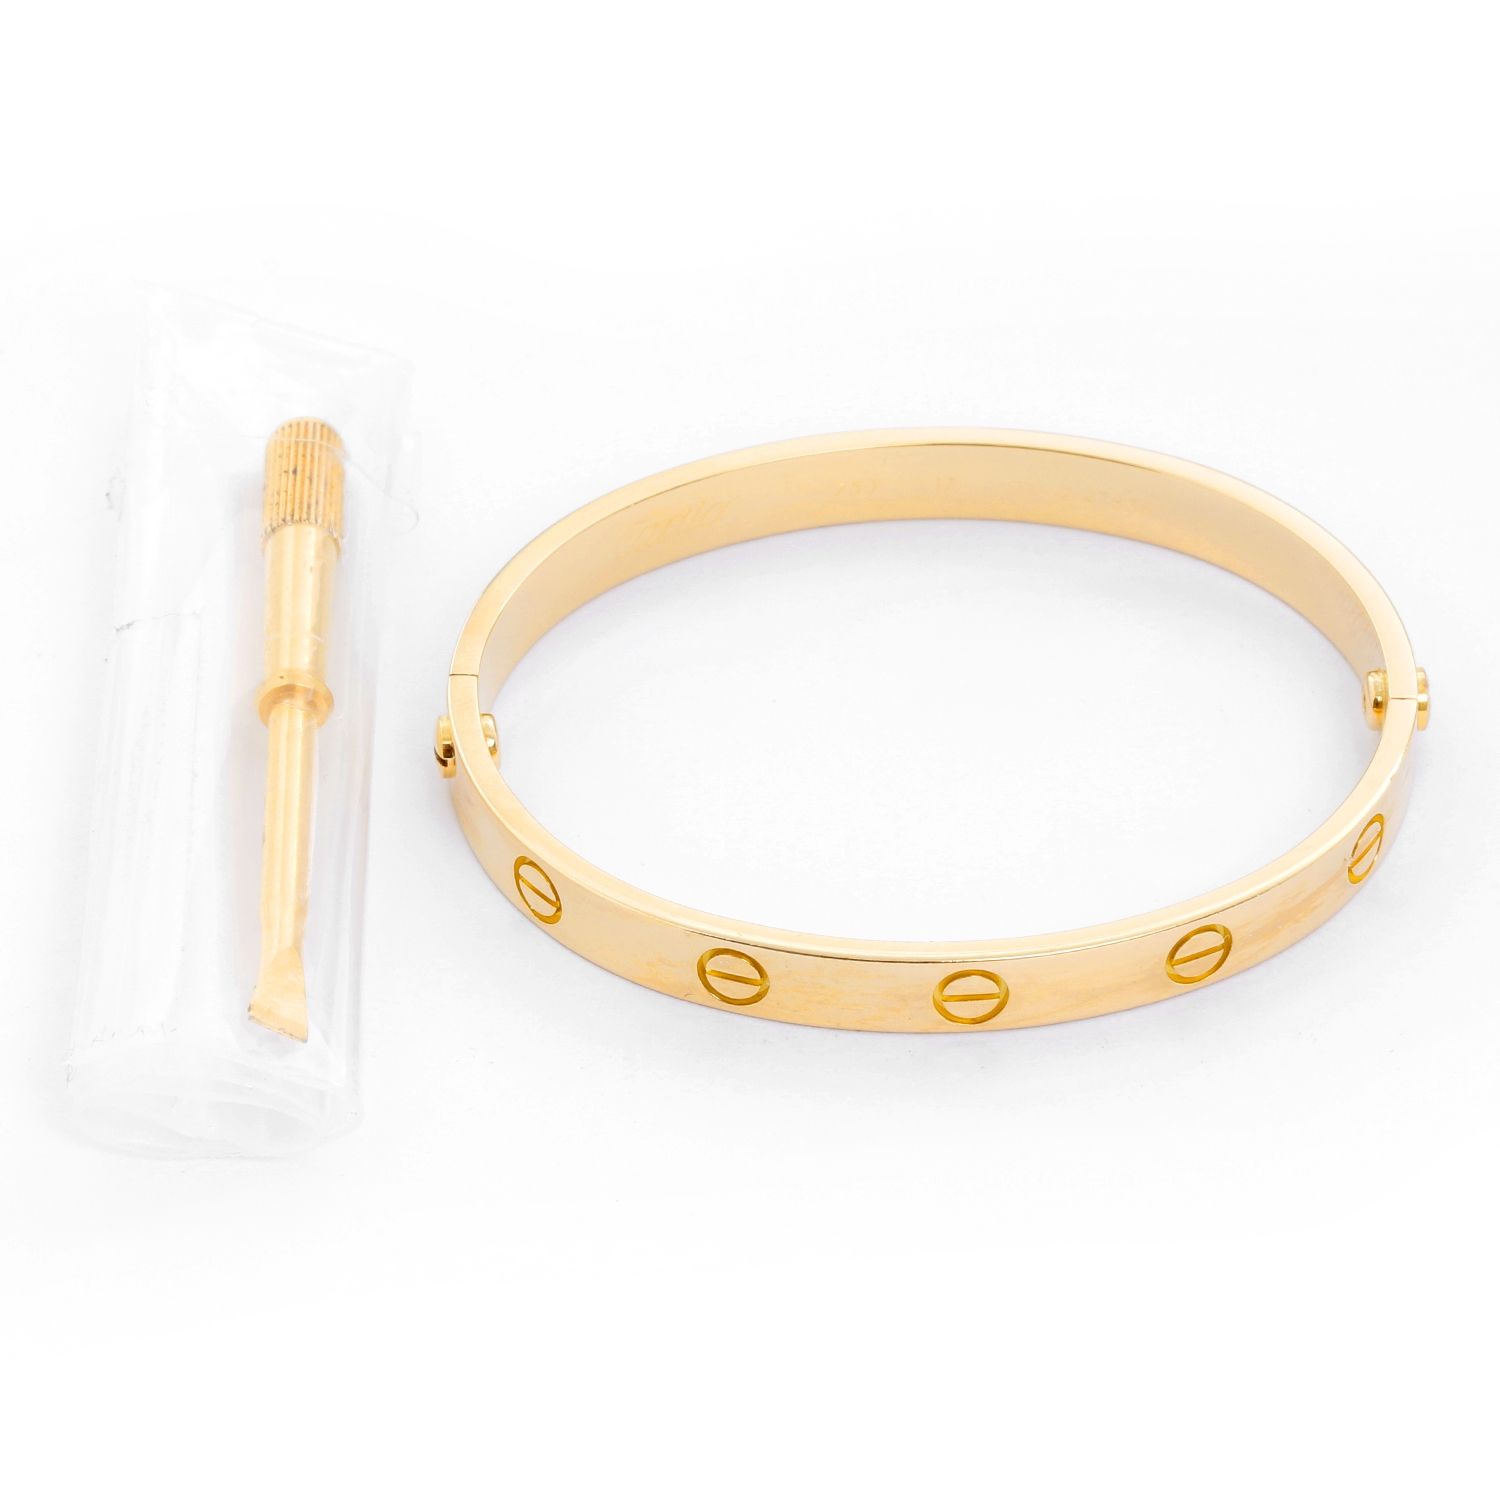 Cartier Love Bracelet 18k Yellow Gold Size 17 With Screwdriver